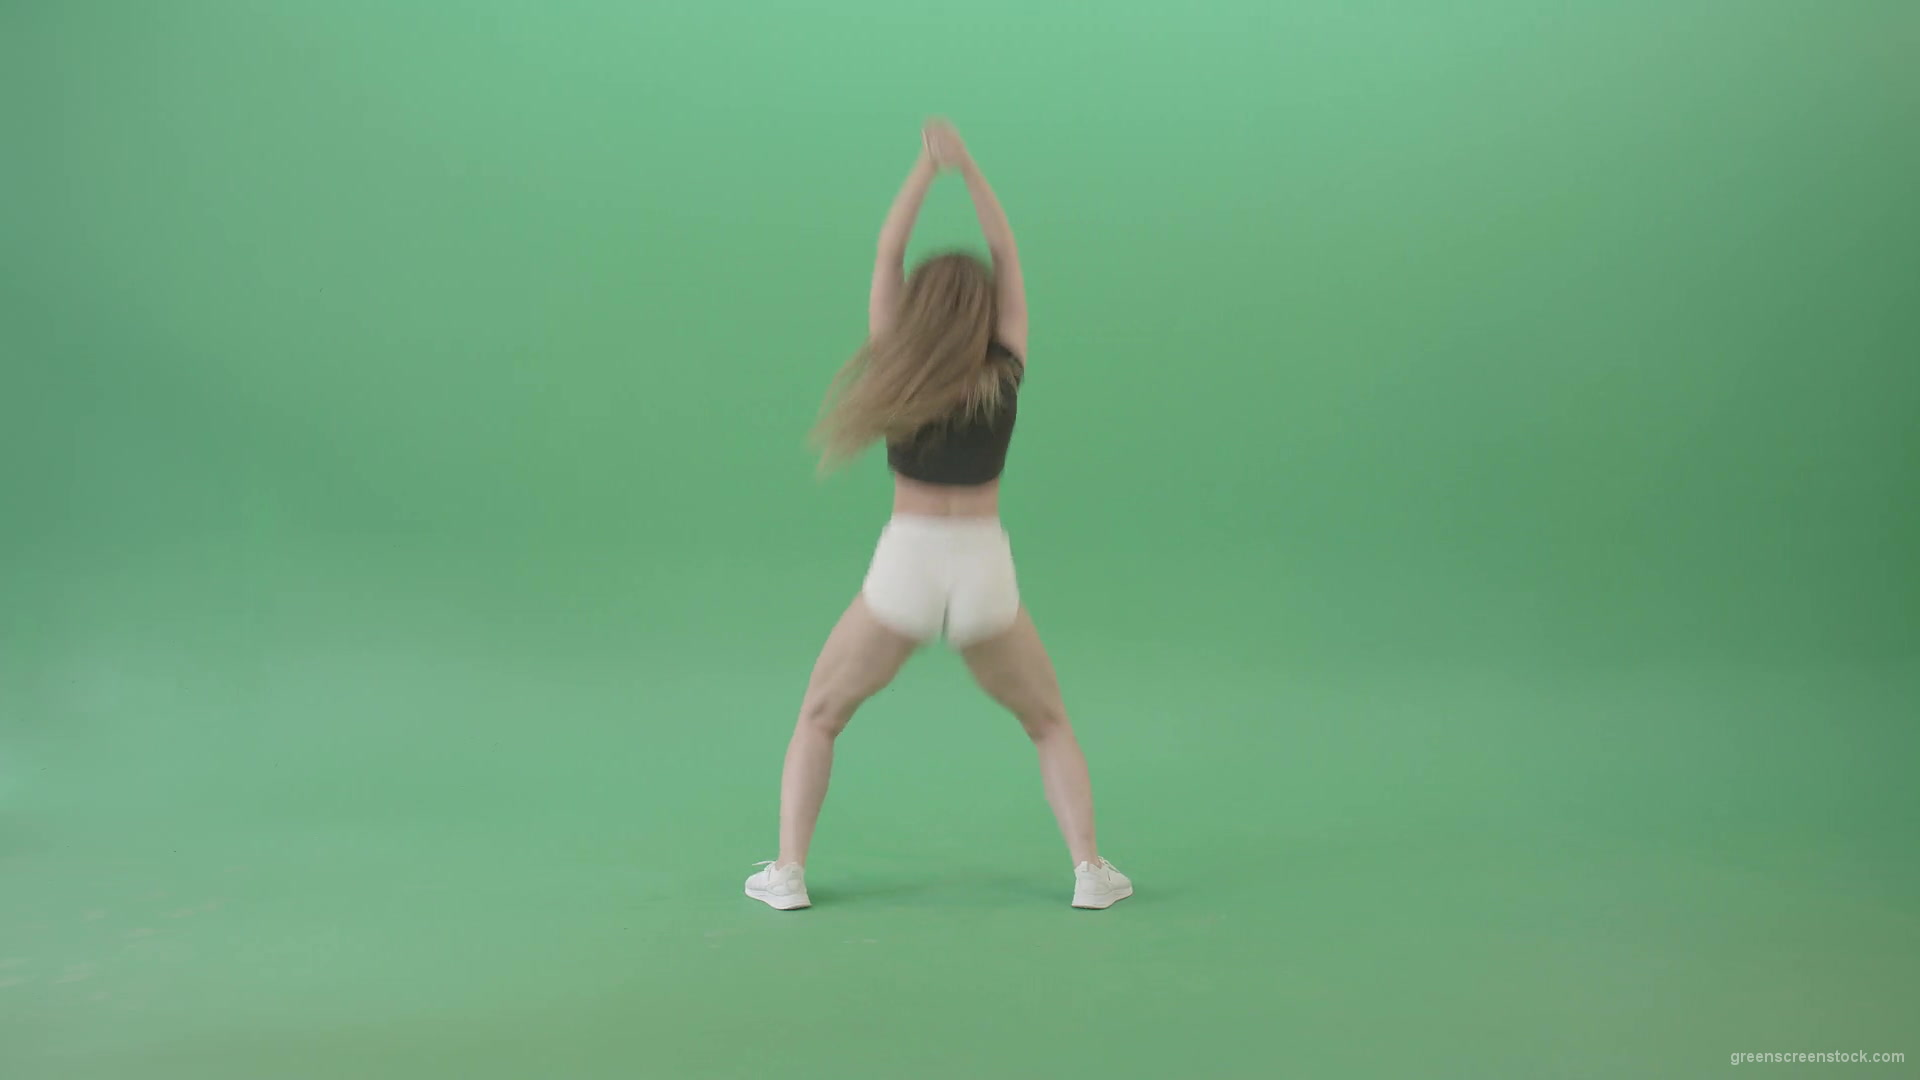 Beauty-girl-sрaking-ass-and-hips-dancing-Twerk-Afro-Dance-isolated-on-green-screen-4K-Video-Footage-1920_004 Green Screen Stock